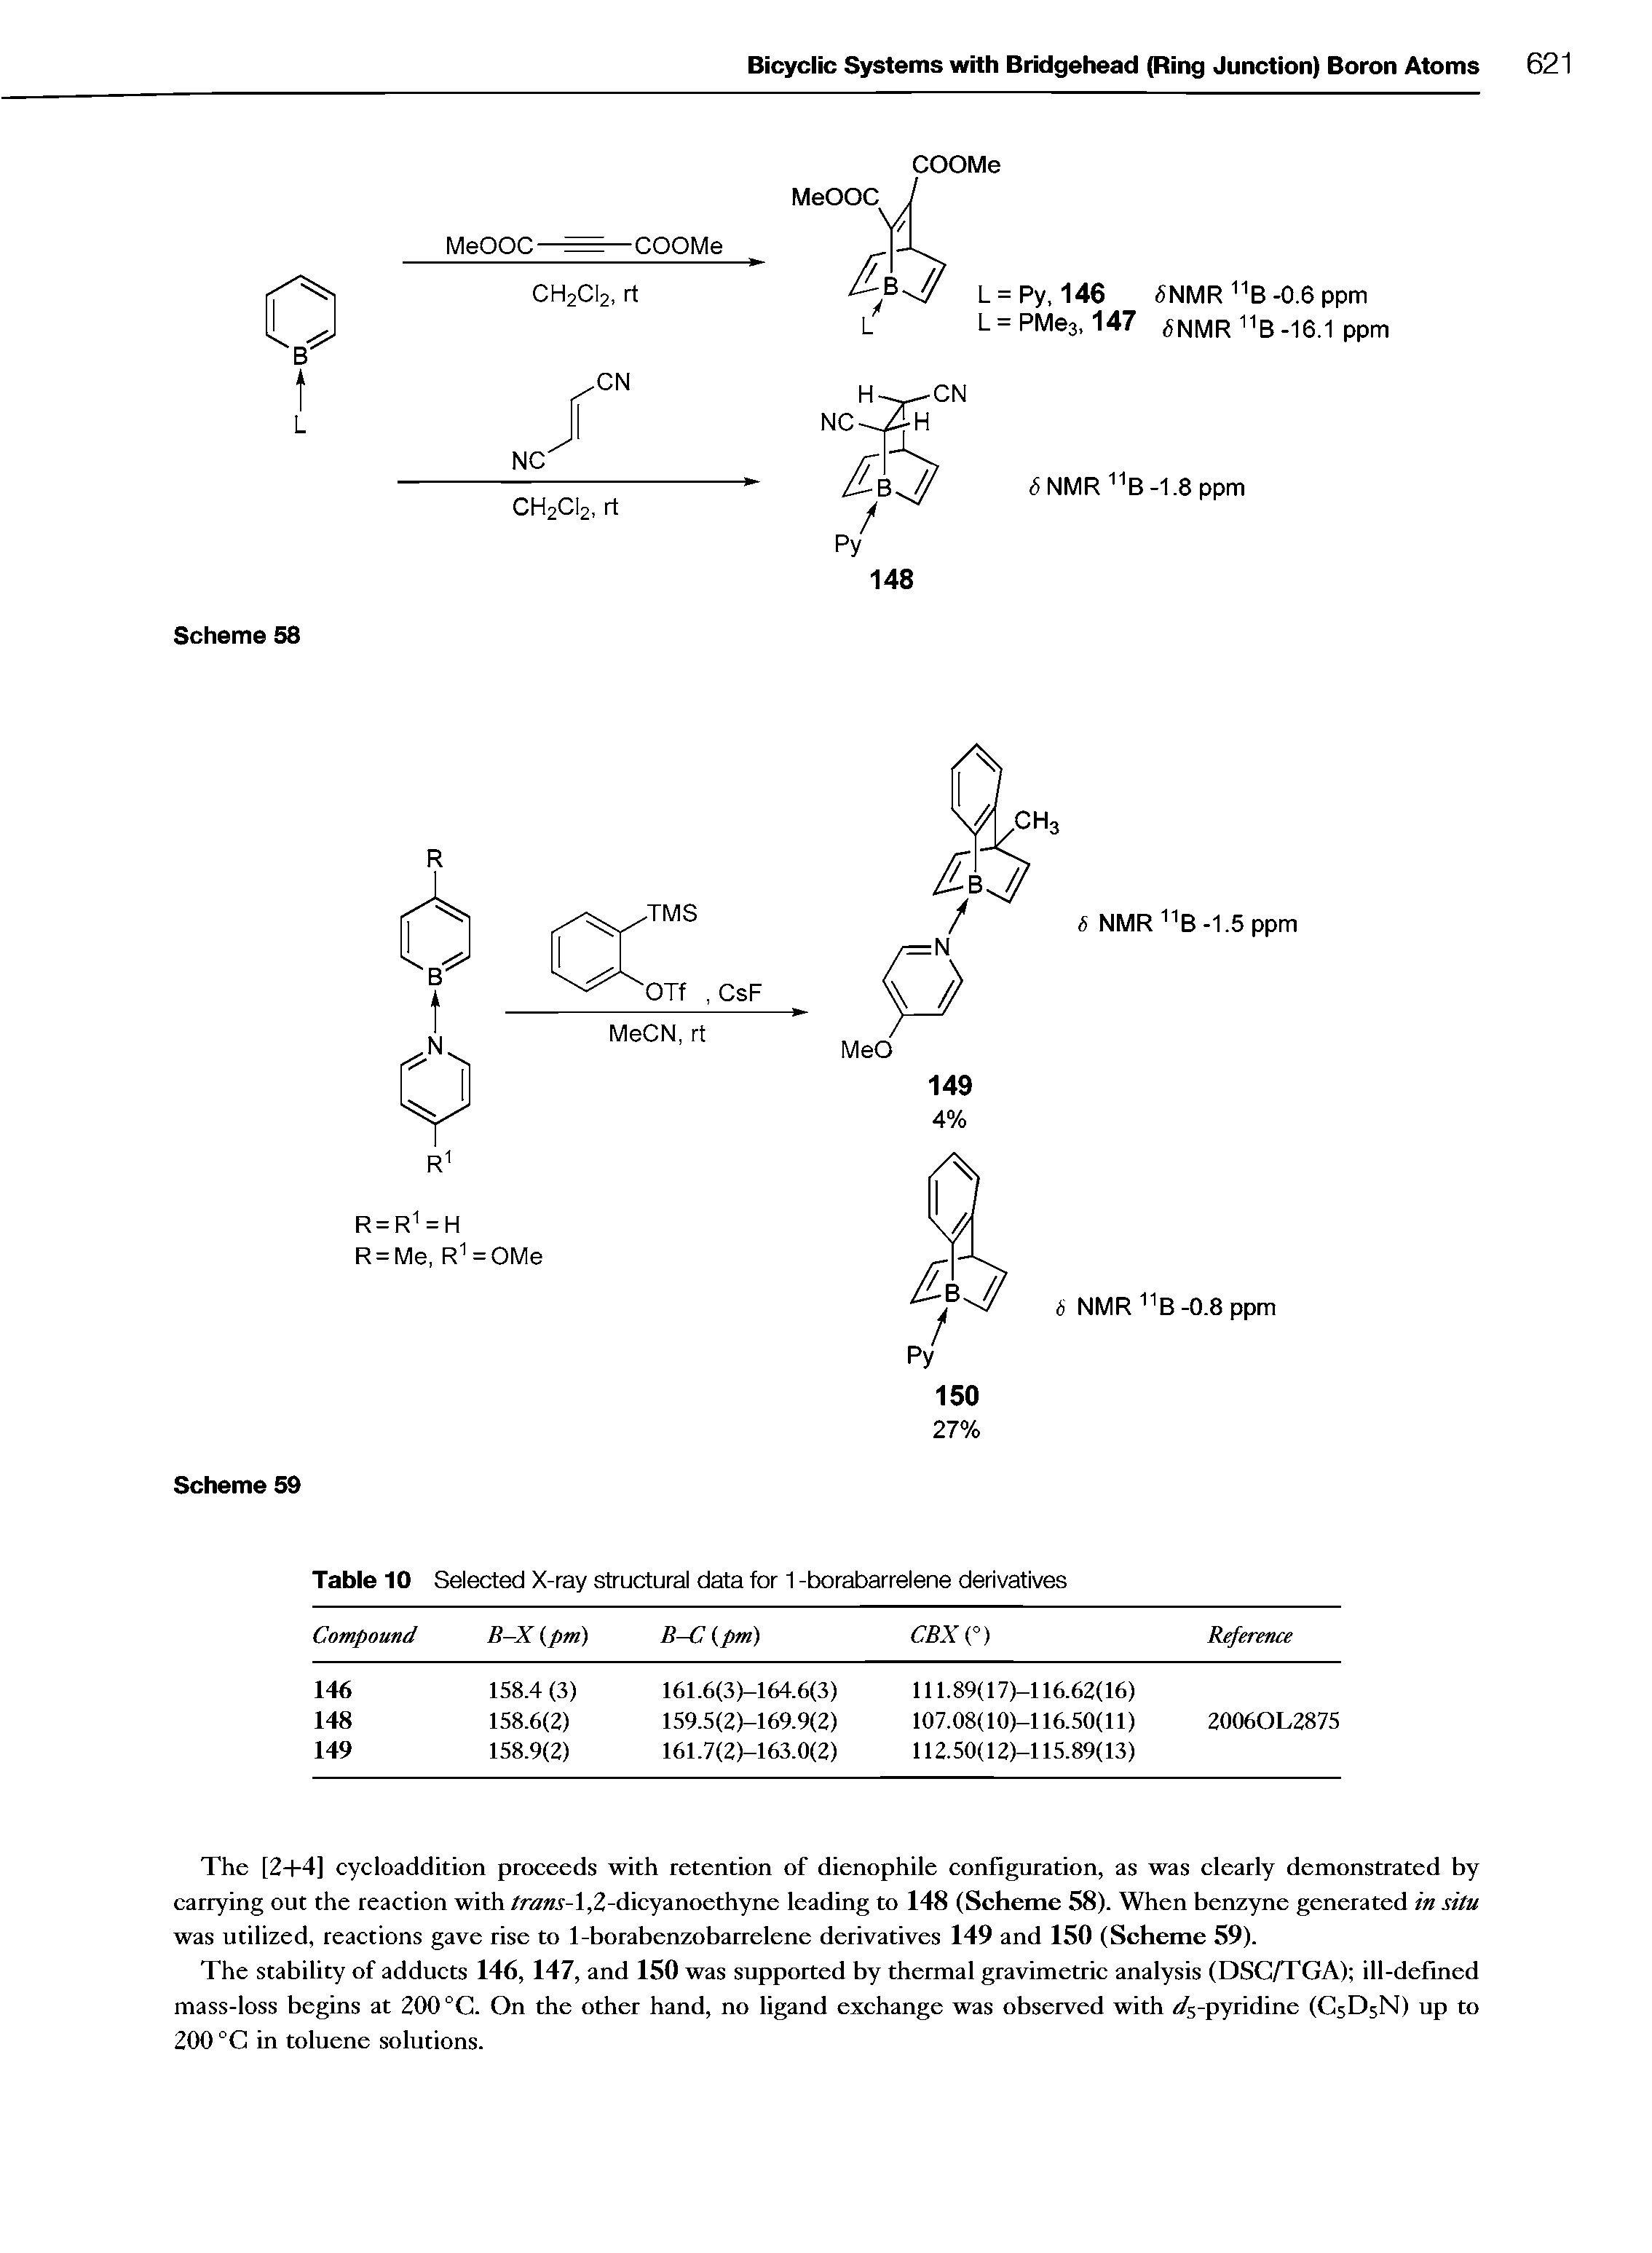 Table 10 Selected X-ray structural data for 1 -borabarrelene derivatives...